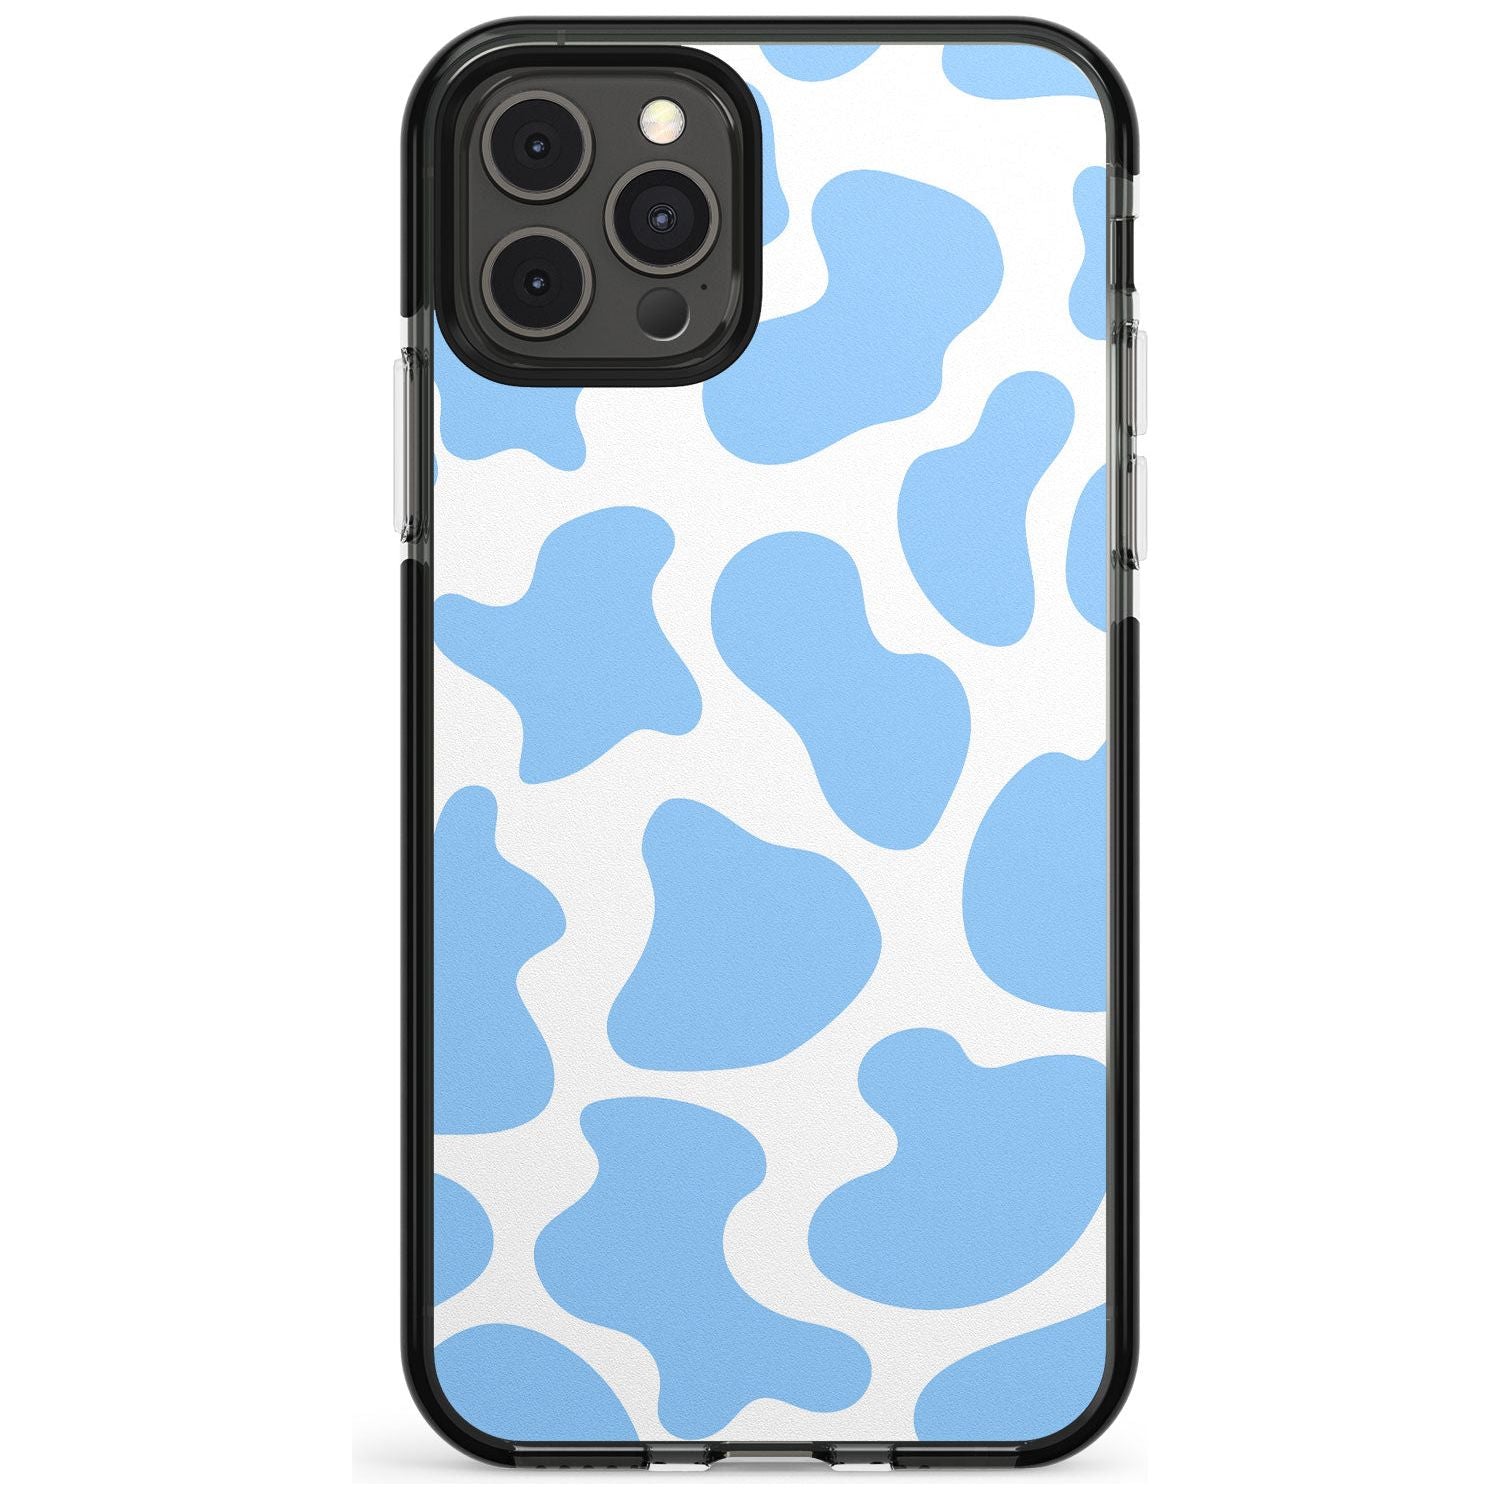 Blue and White Cow Print Black Impact Phone Case for iPhone 11